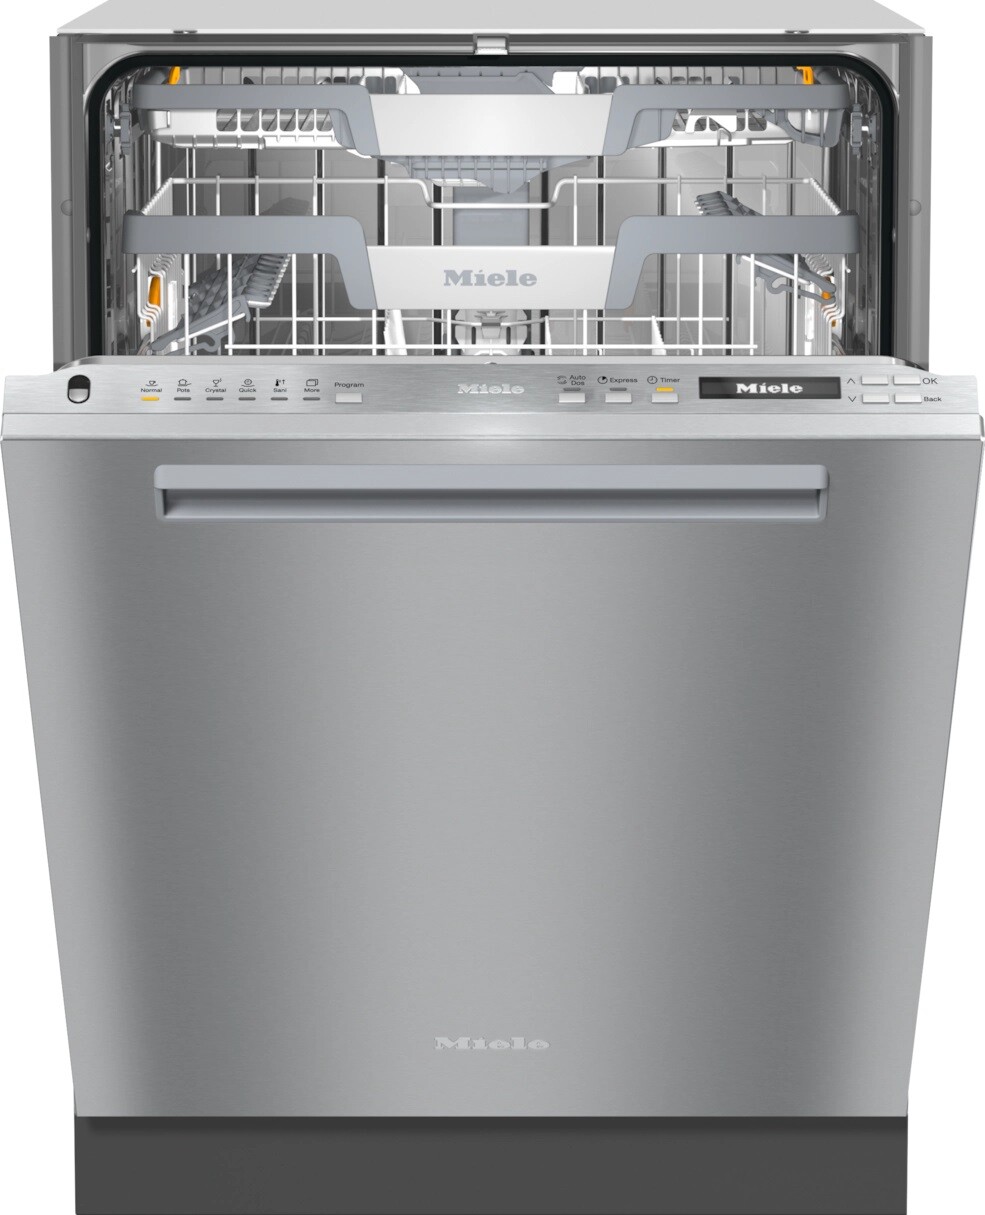 24"" Fully Integrated Built In Dishwasher - Miele G7166SCVISFP